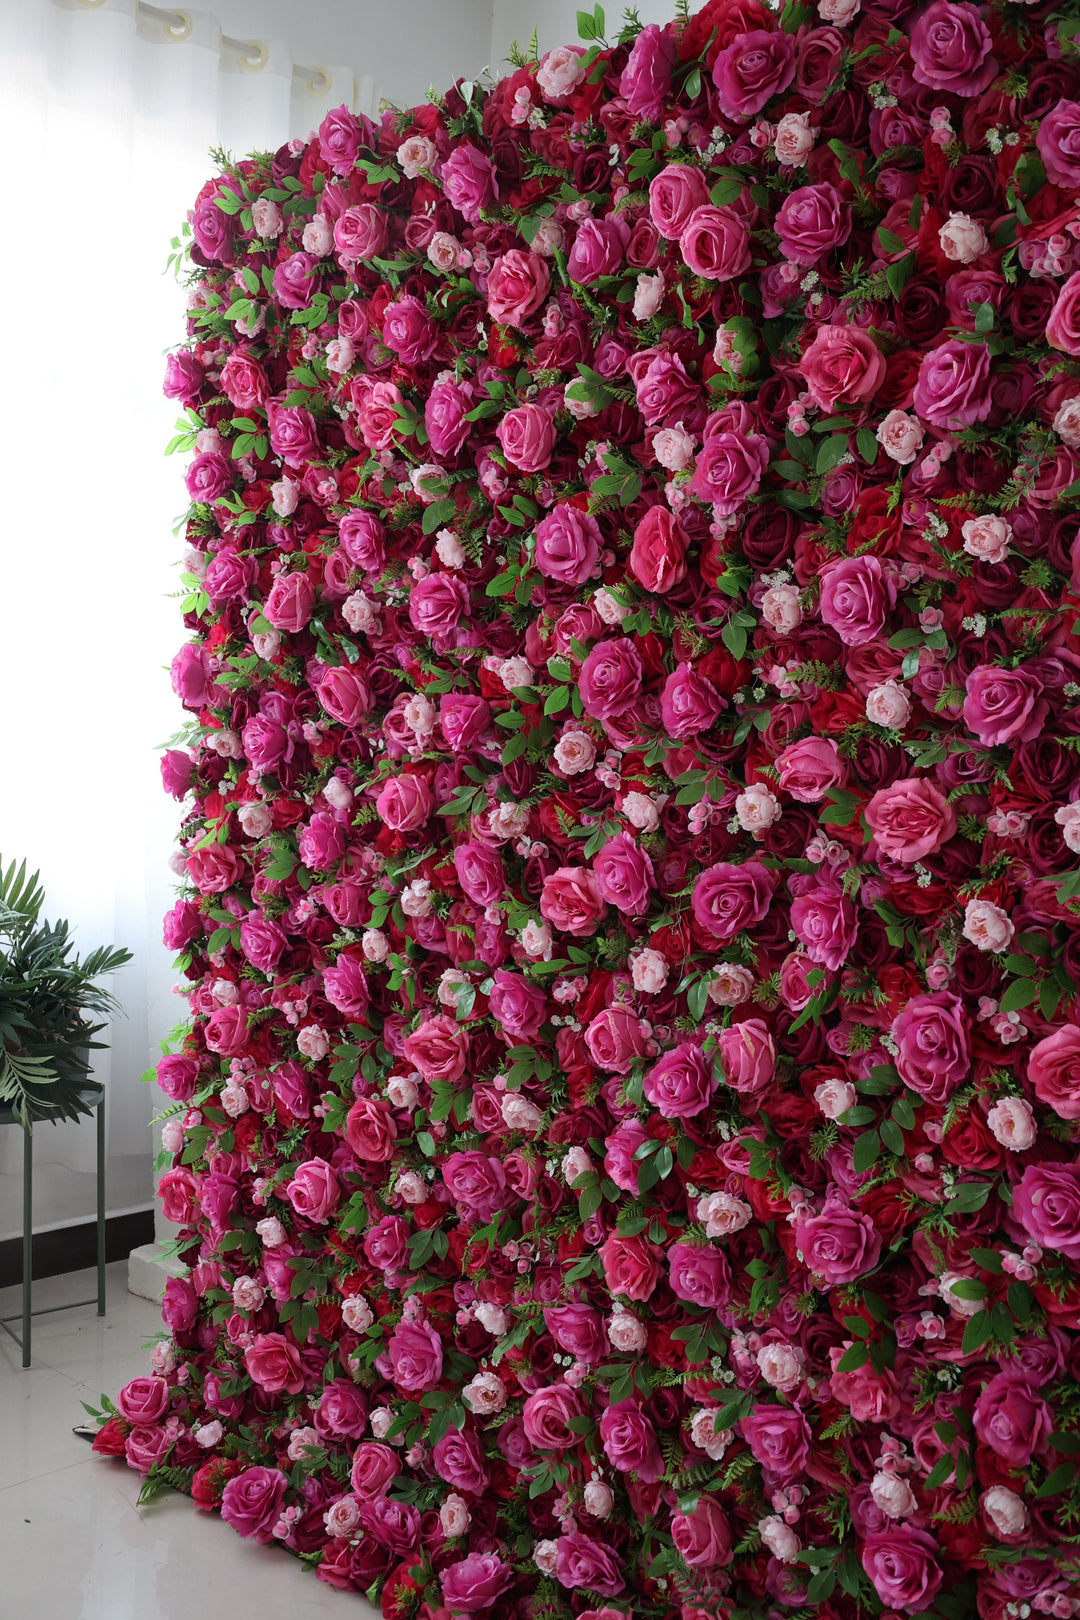 Red Roses And Green Leaves, Artificial Flower Wall, Wedding Party Backdrop